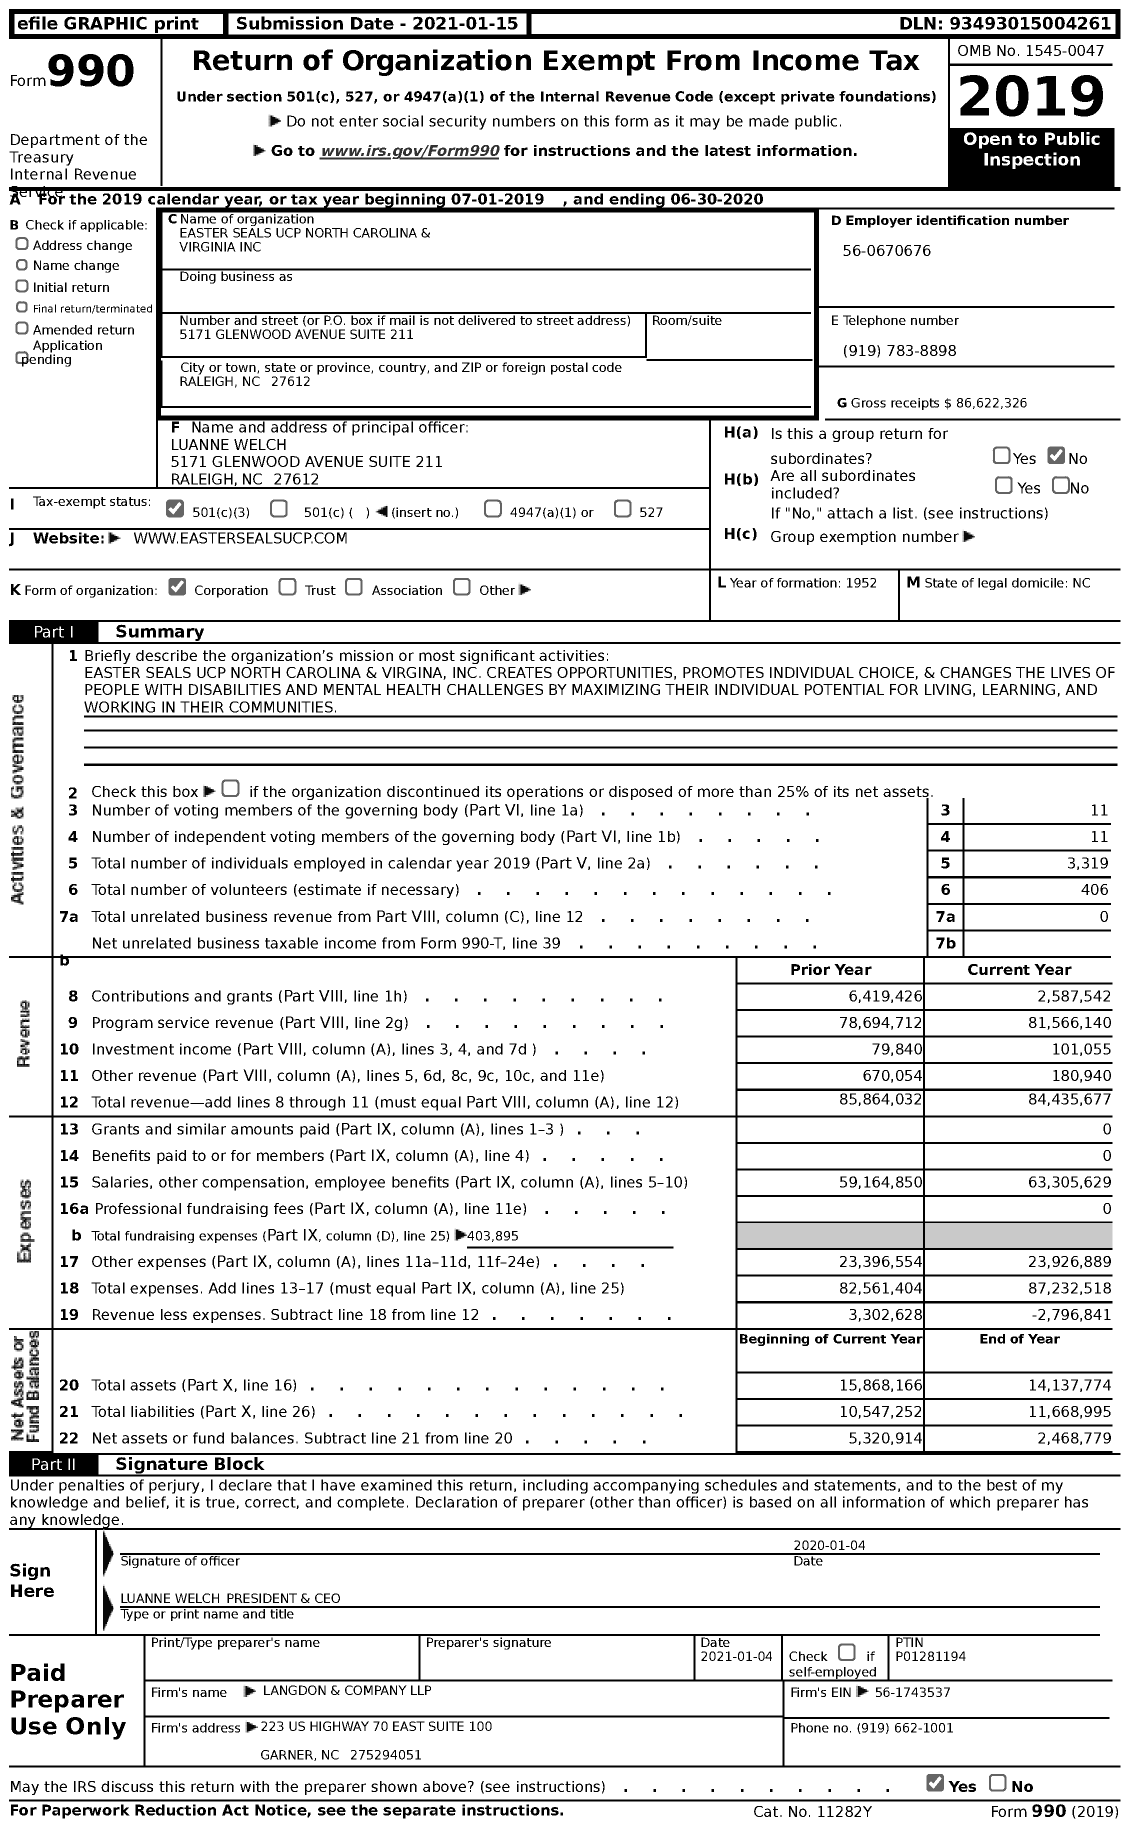 Image of first page of 2019 Form 990 for Easter Seals Ucp North Carolina and Virginia